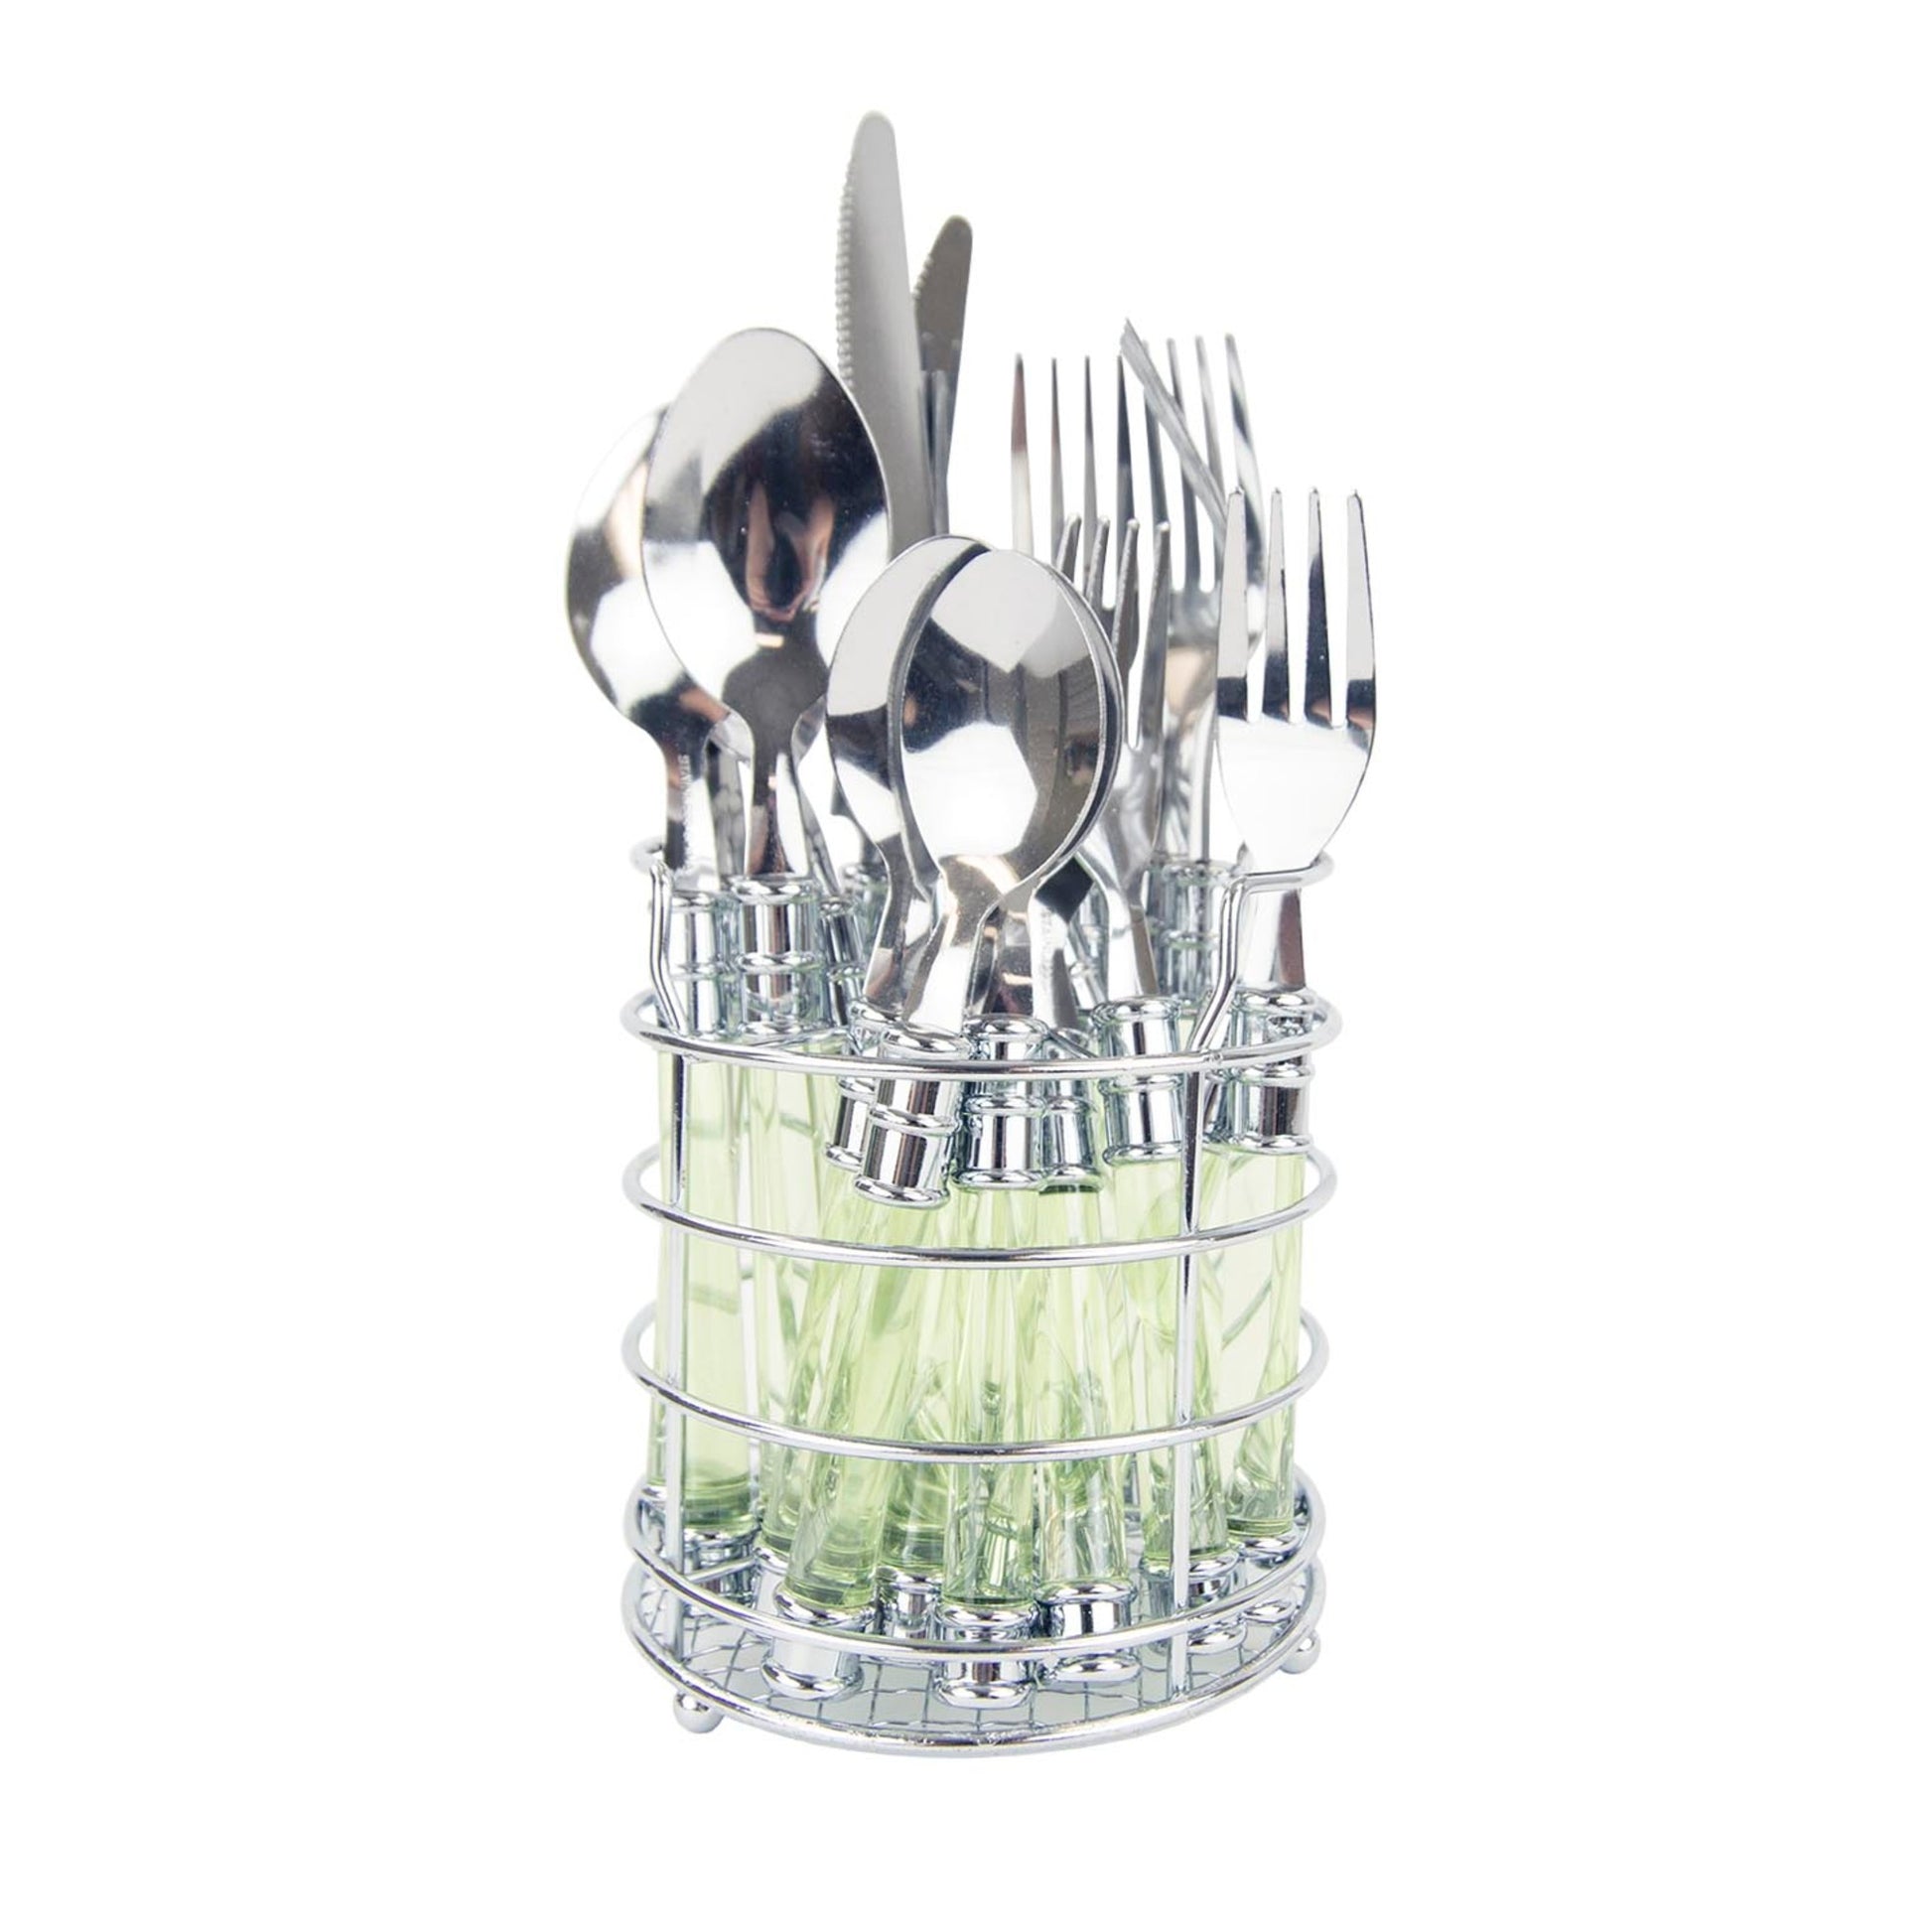 Home Basics 20 Piece Flatware Set with Caddy - Green